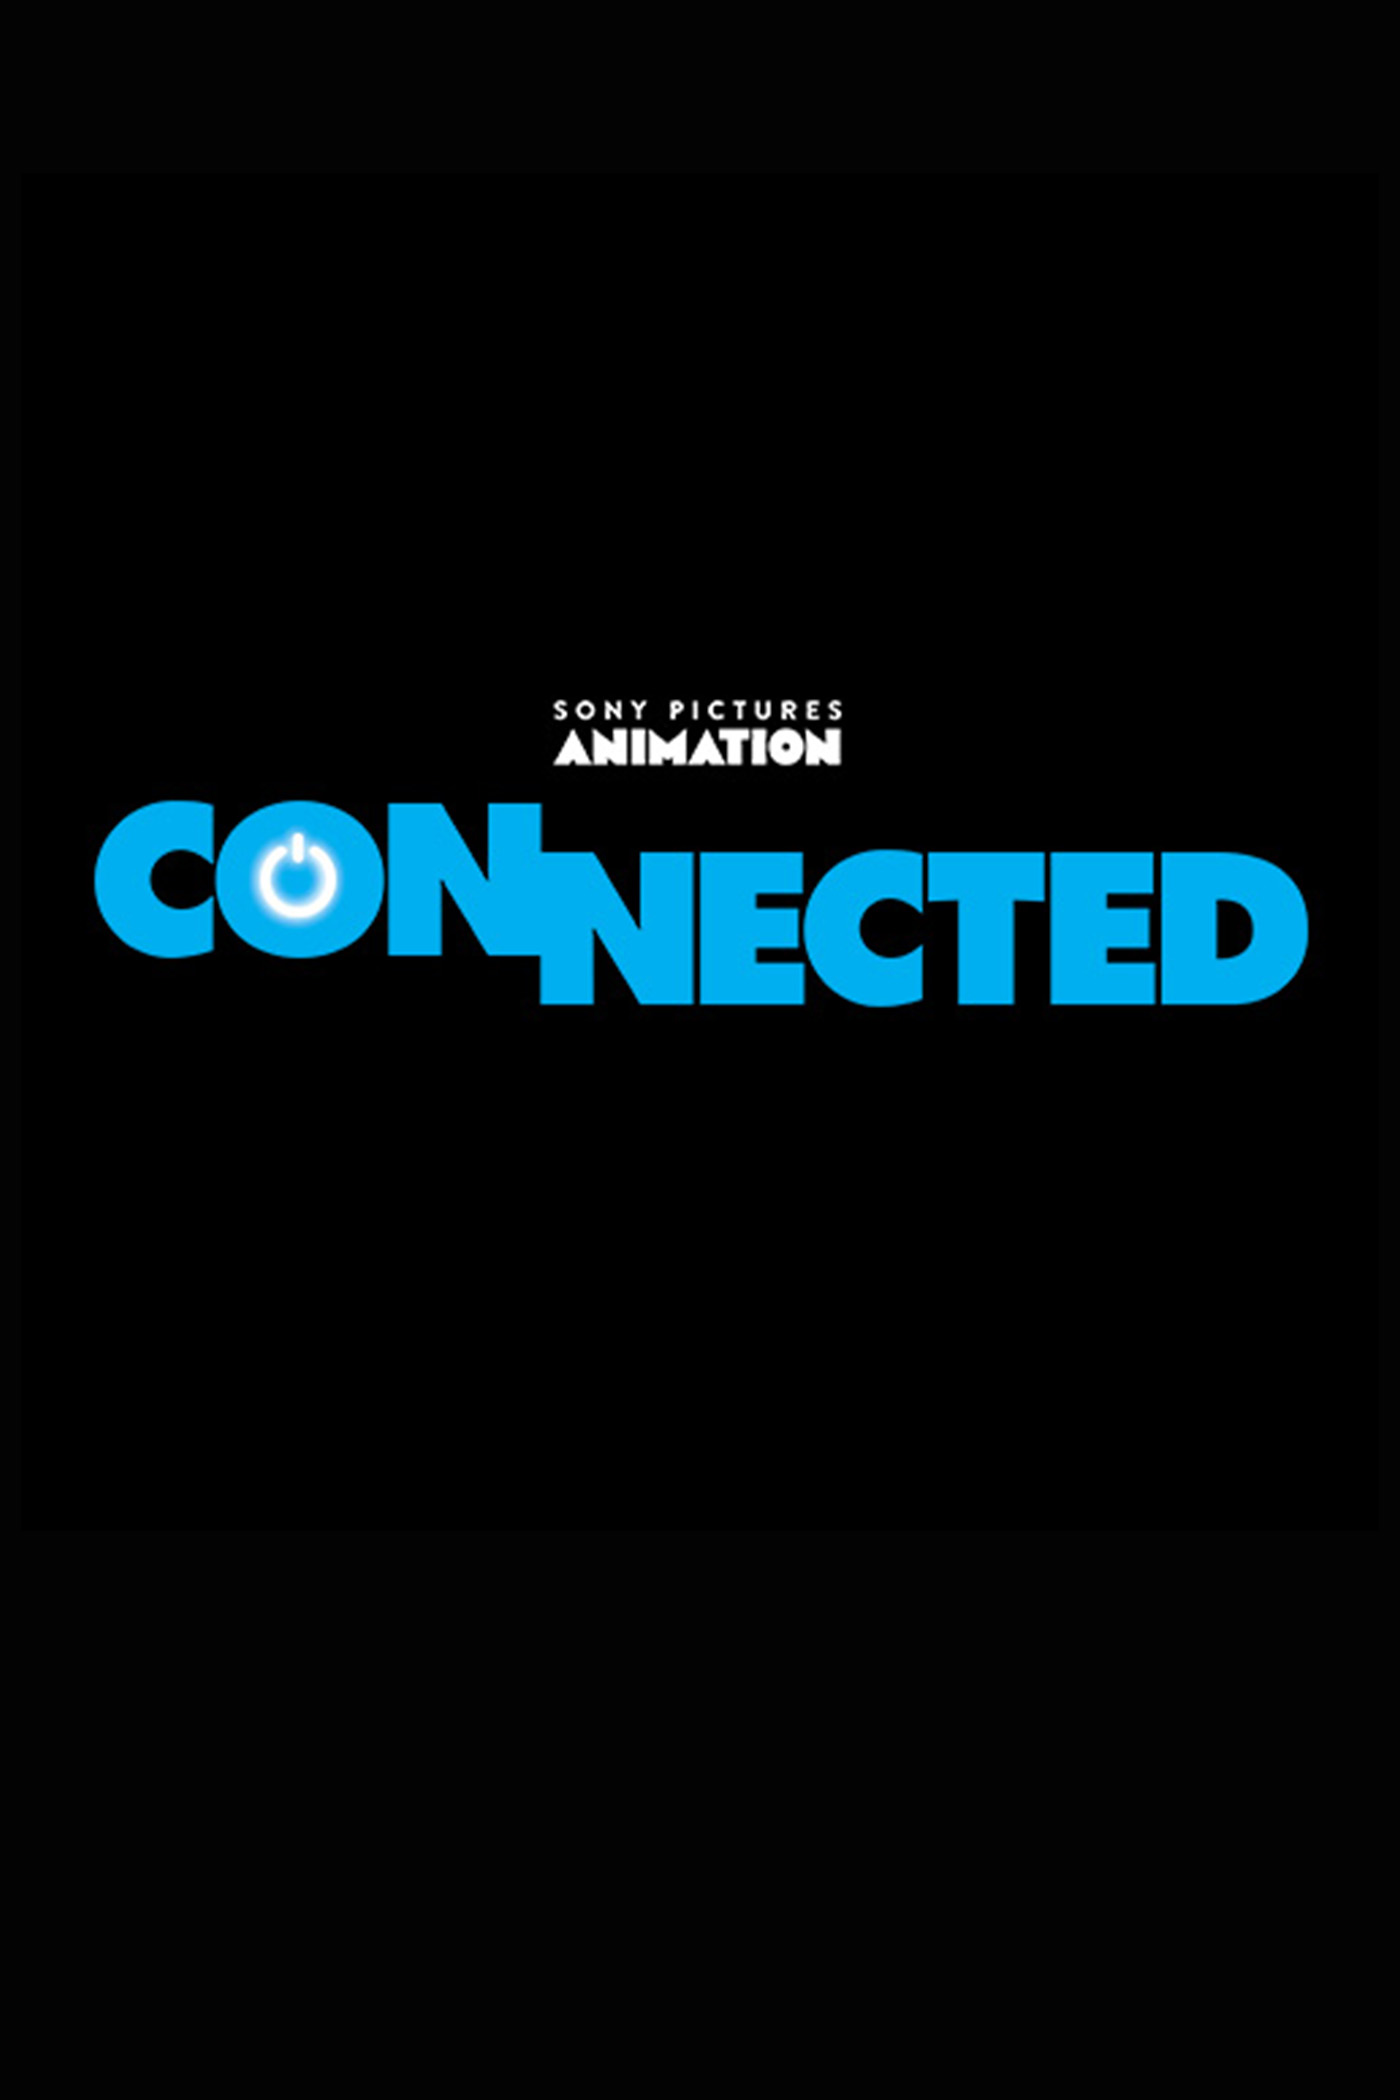 New Movie: Connected Starring Danny McBride, Maya Rudolph, Eric Andre